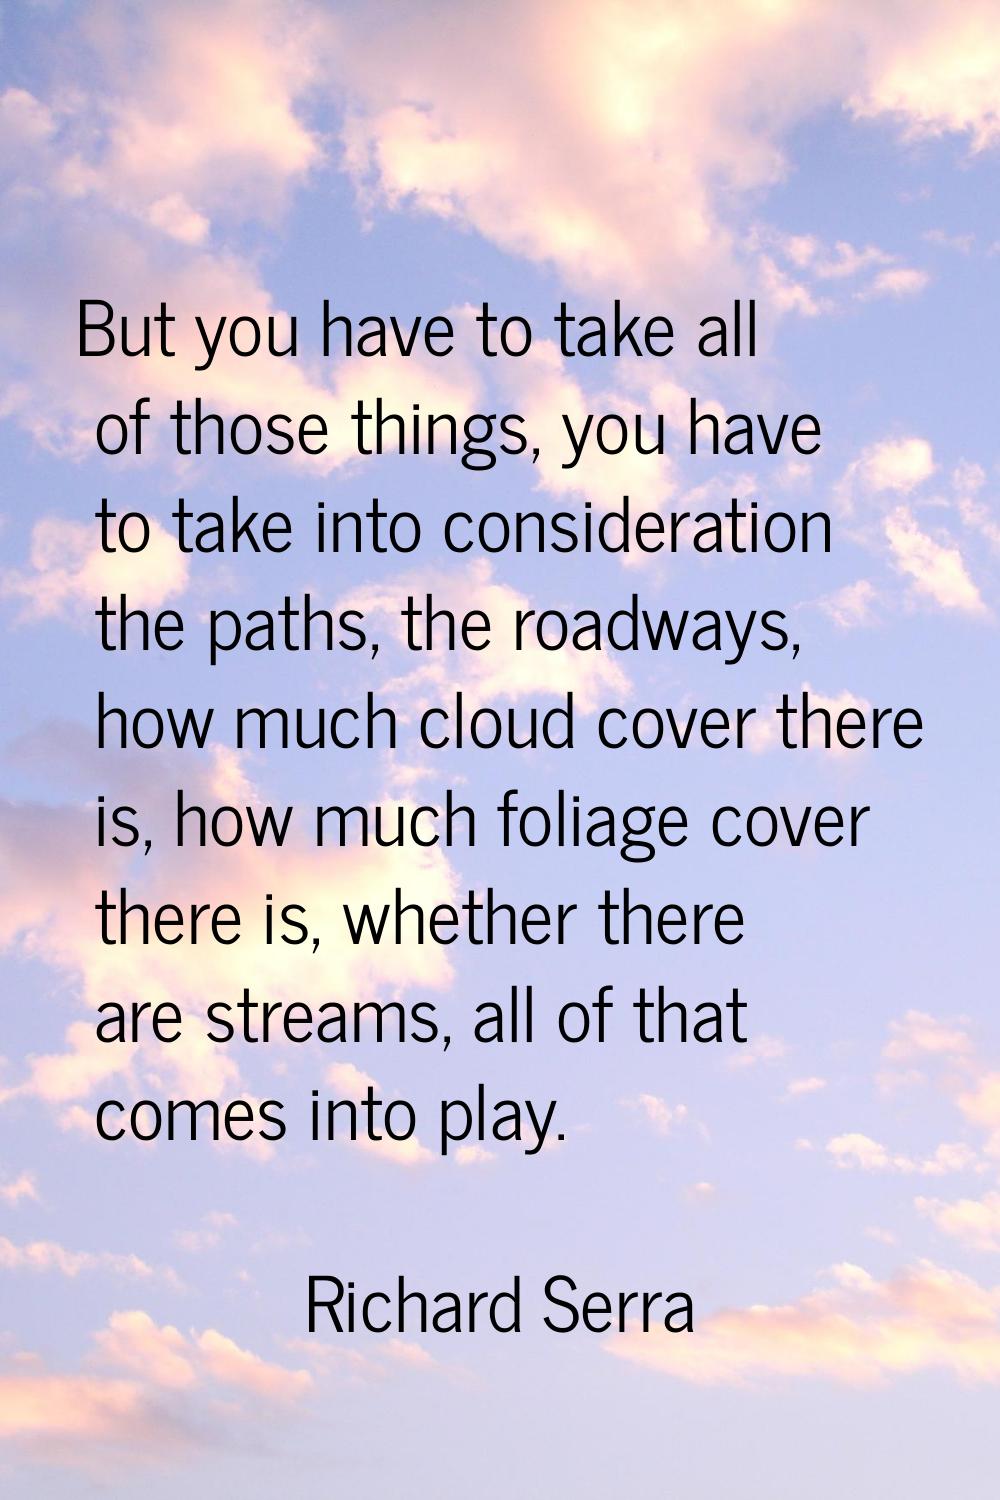 But you have to take all of those things, you have to take into consideration the paths, the roadwa